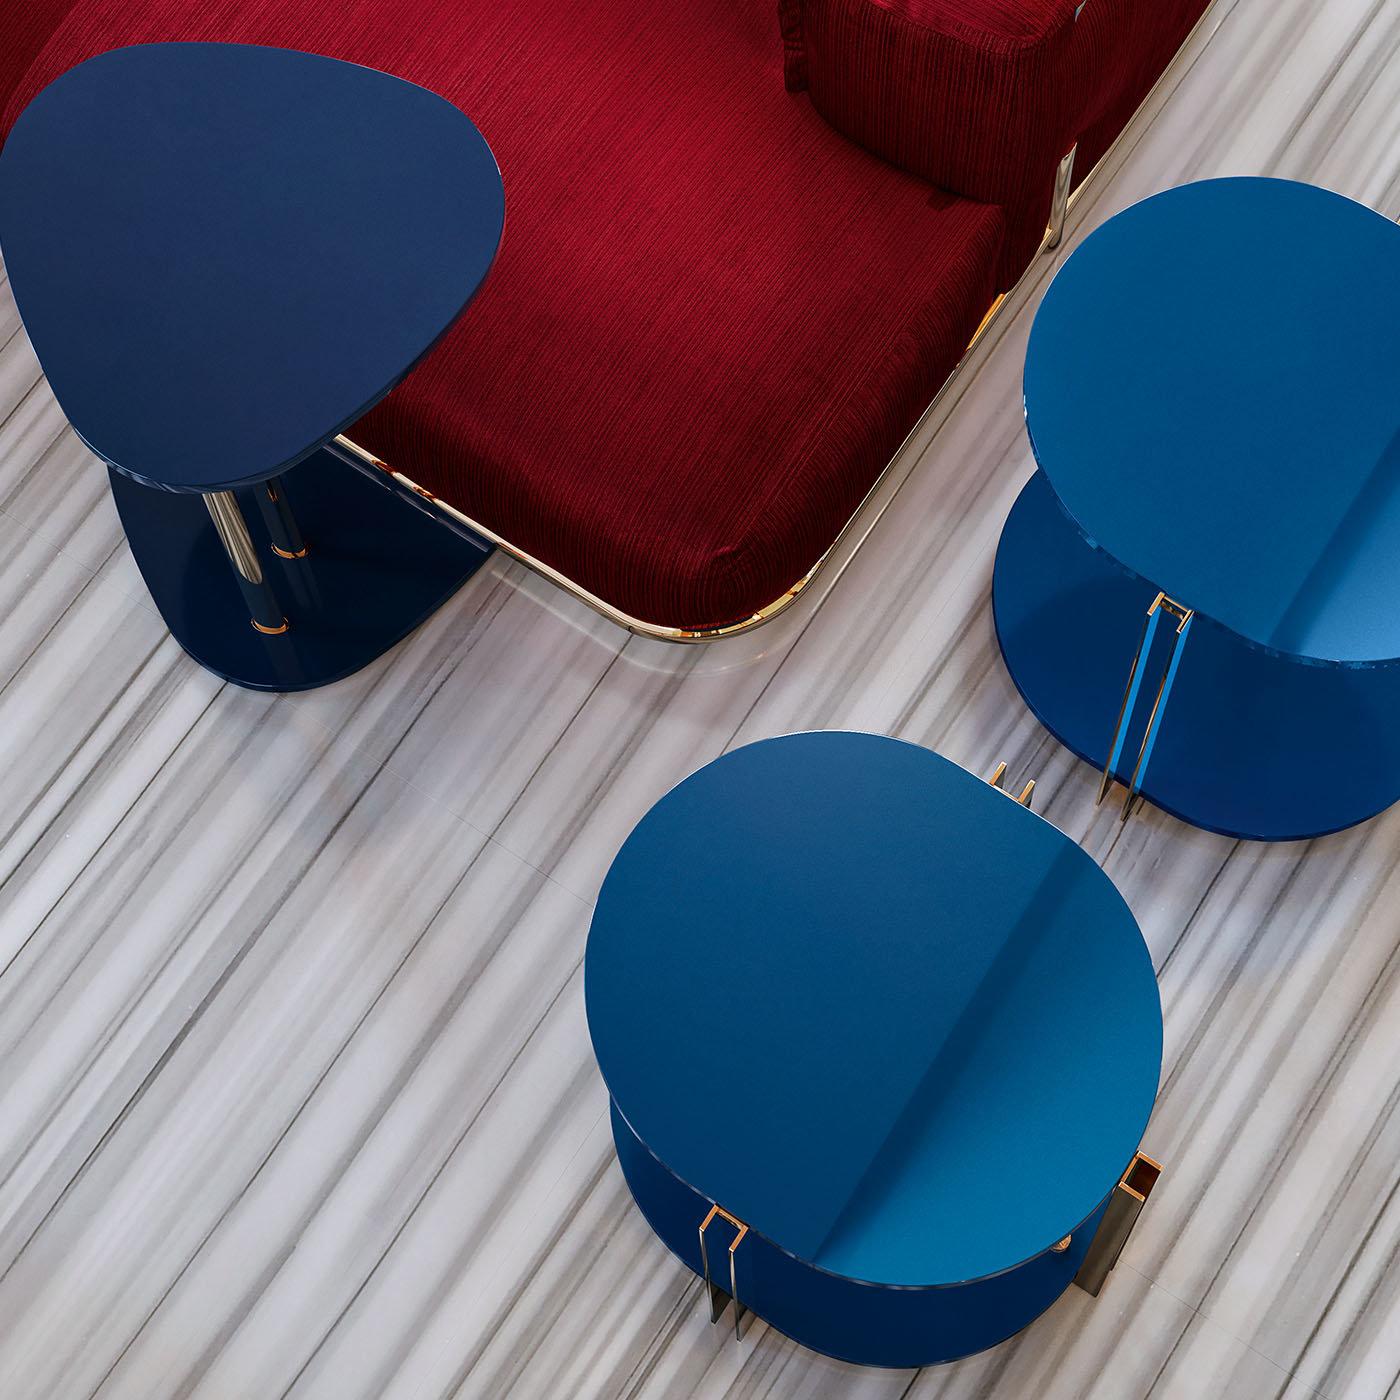 This side table from the Kassel Collection will infuse sophistication into any interior. Channeling a chic modern style, this side table is defined by an identical top and base in lacquered wood in a vibrant cobalt hue enclosed by three sections of